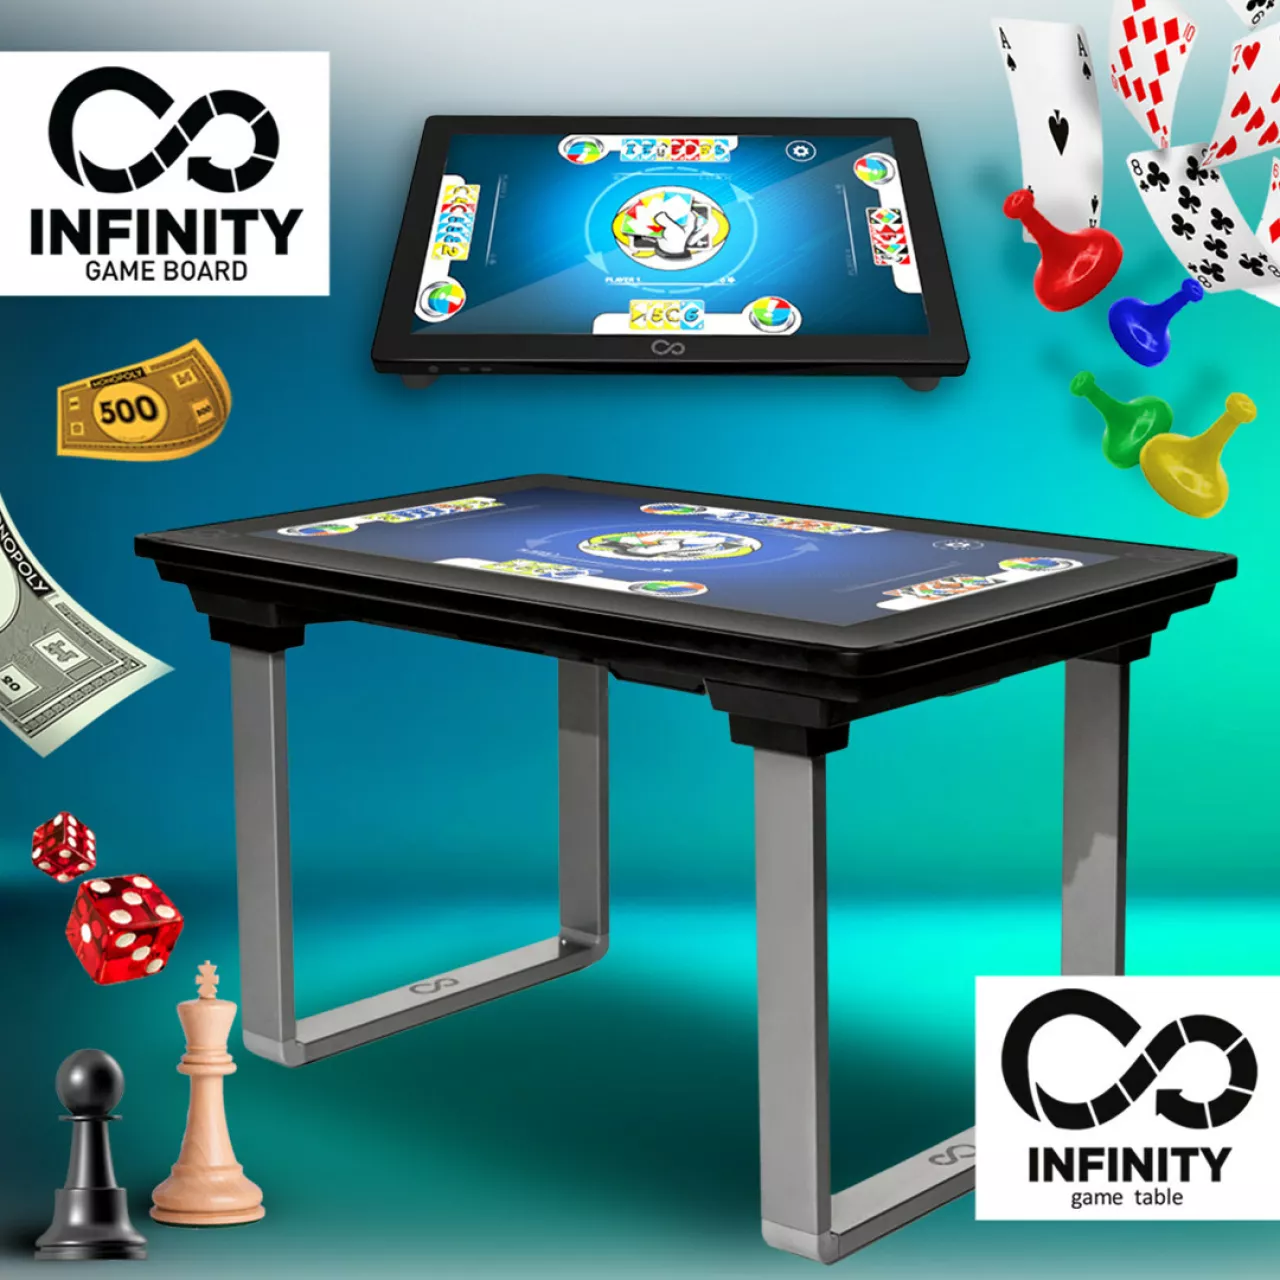 ARCADE1UP LEVELS UP GAME NIGHT WITH RELEASE OF INFINITY GAME BOARD img#1